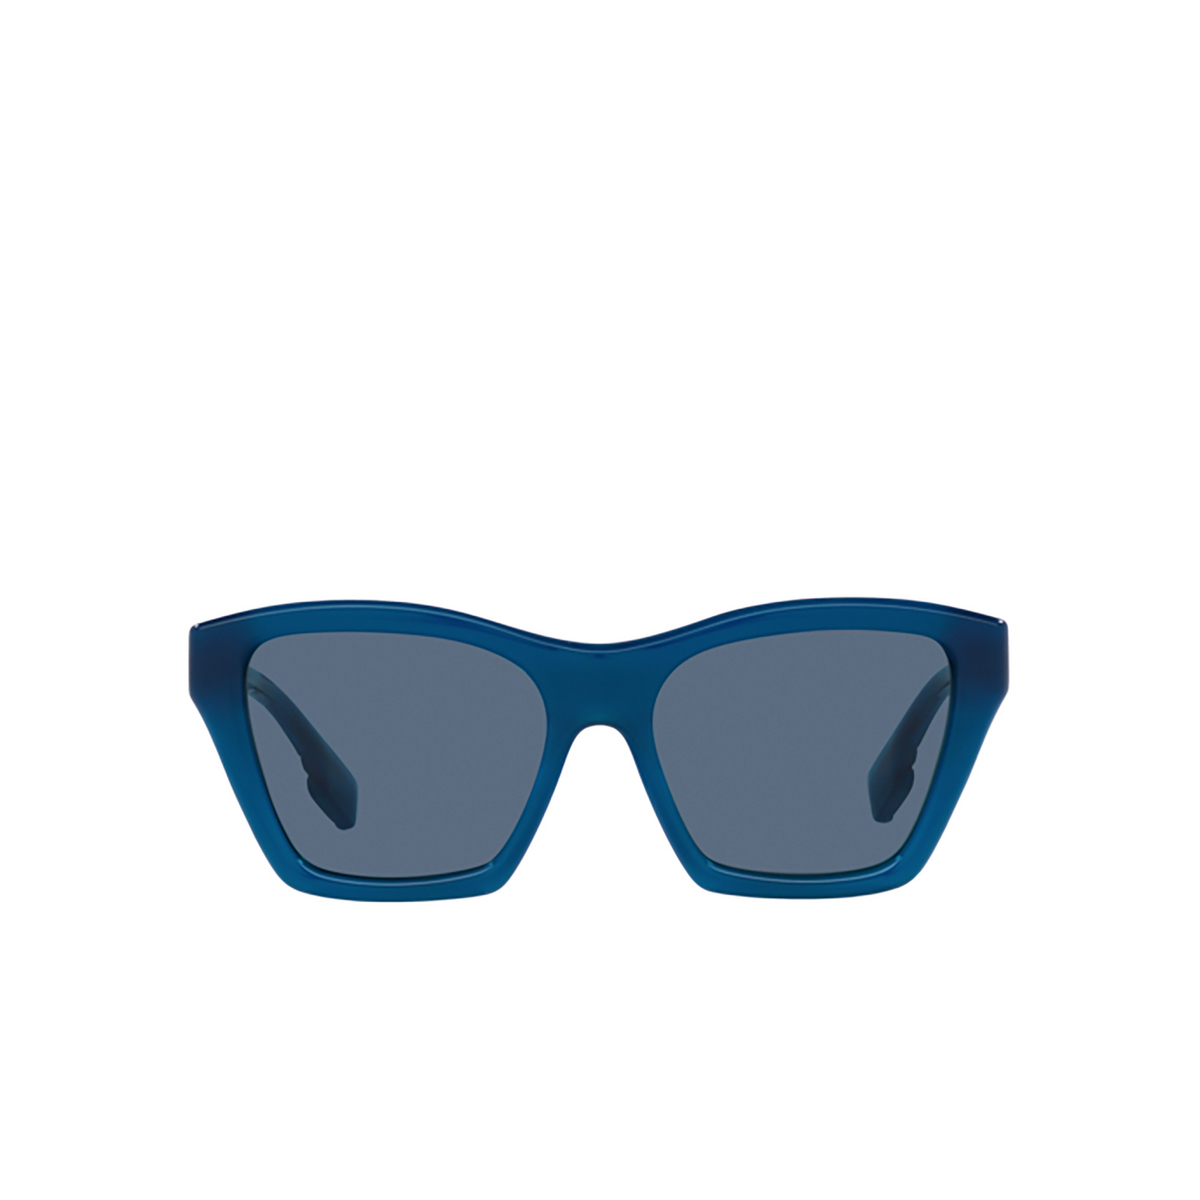 Burberry ARDEN Sunglasses 406480 Blue - front view